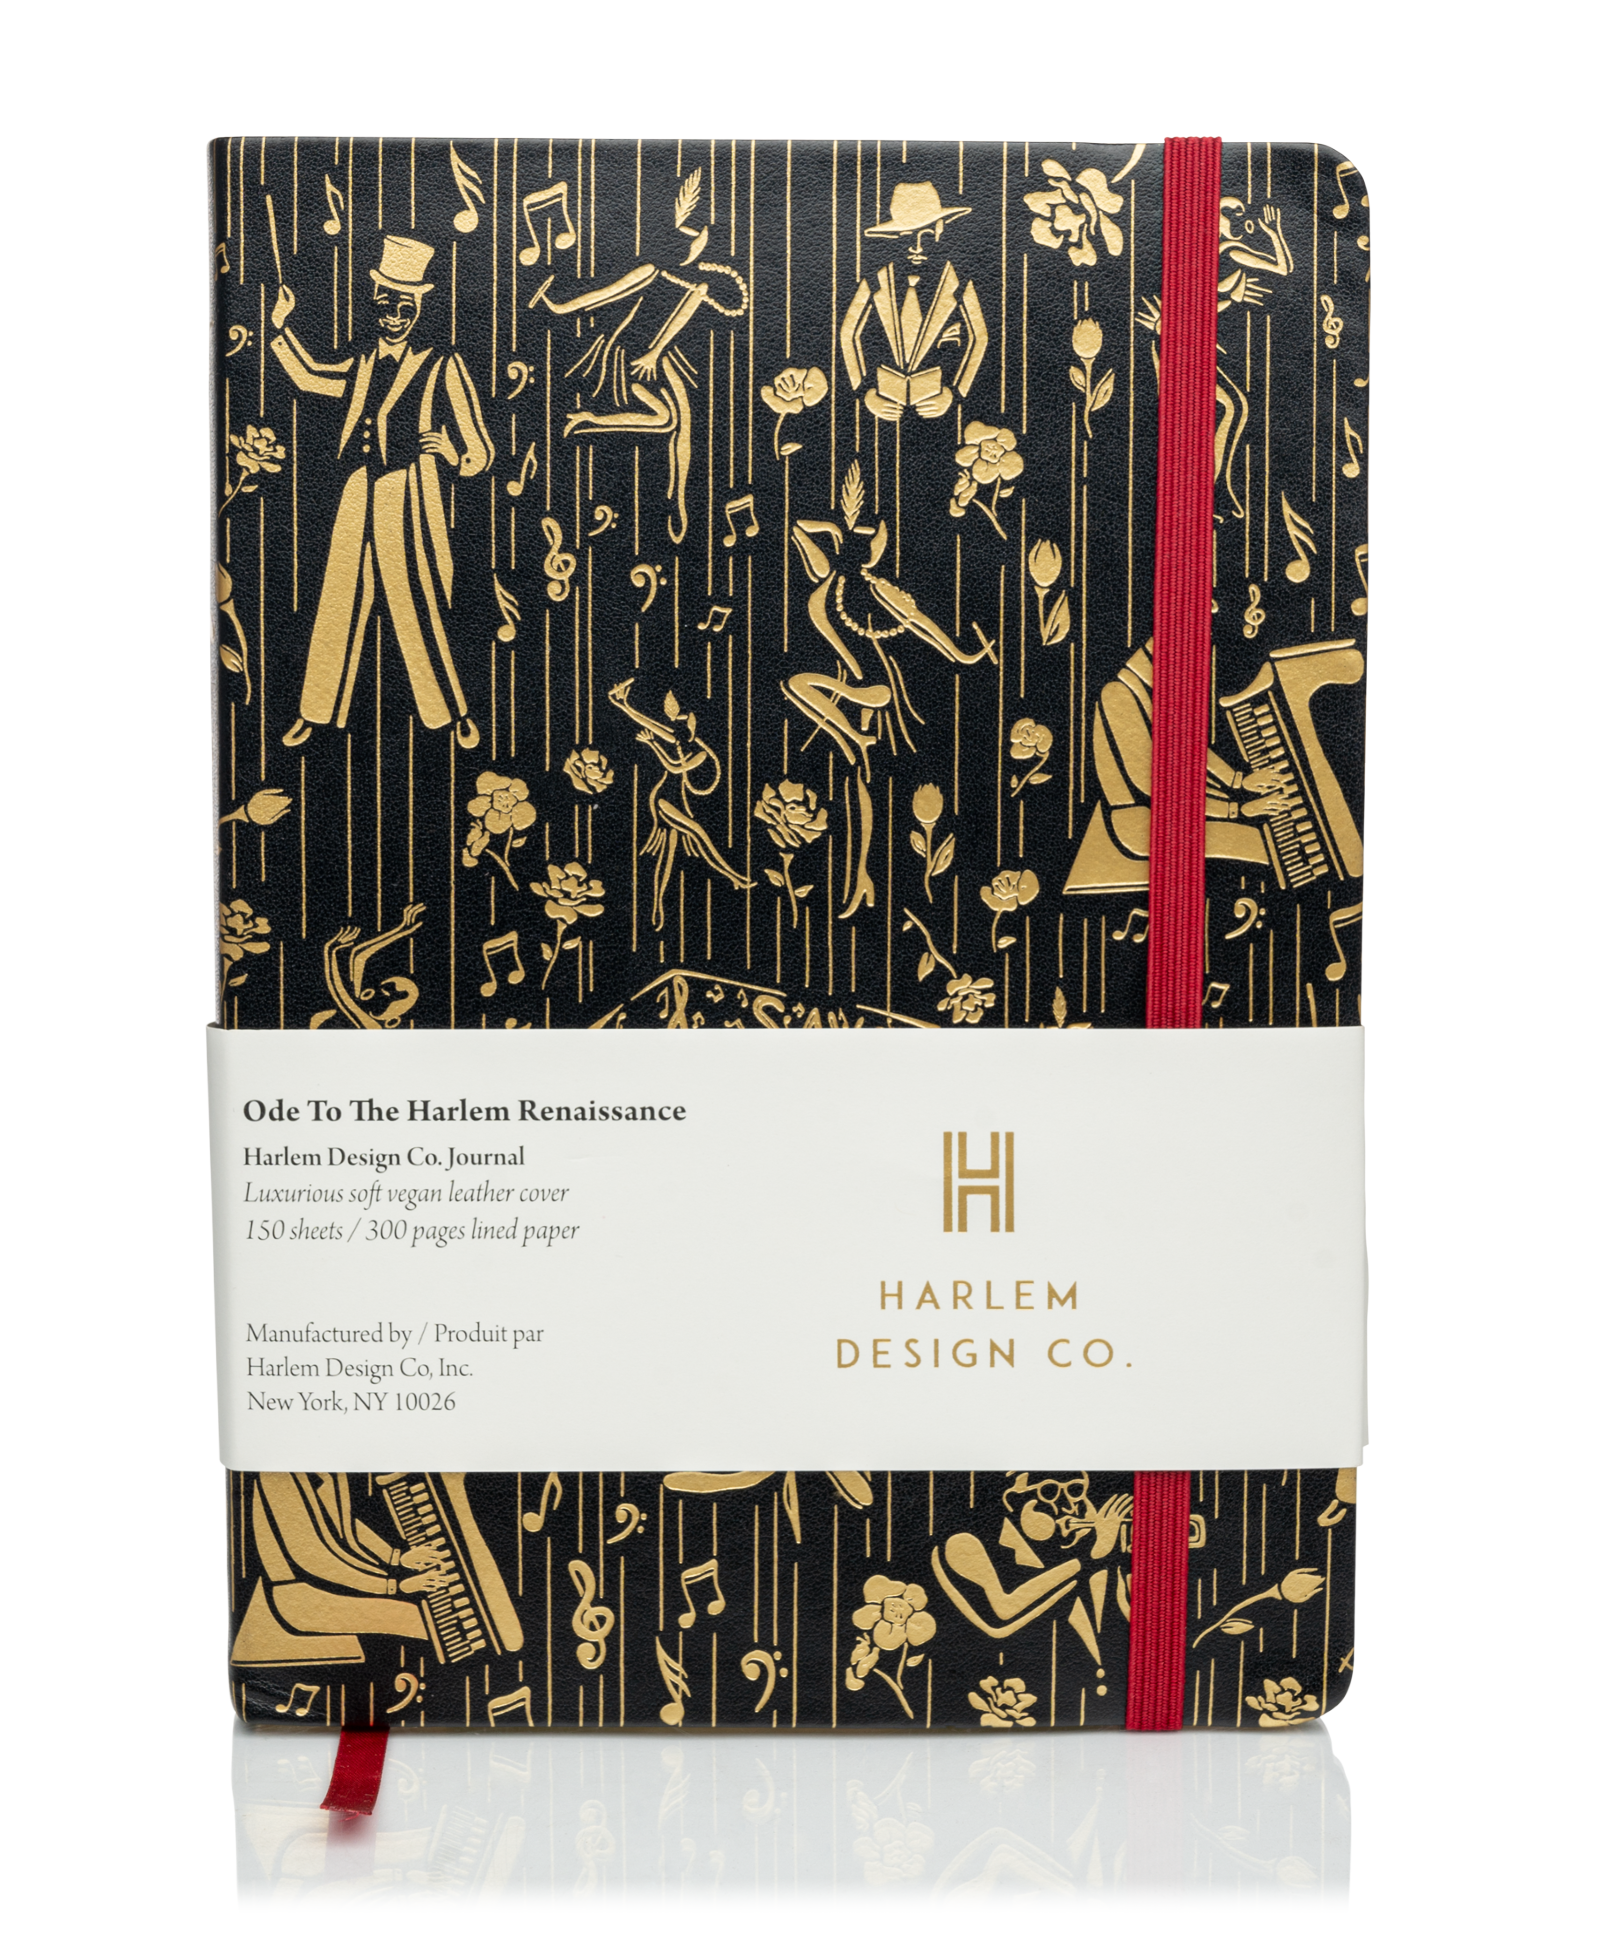 This is a product image of the Harlem Design Co Renaissance journal in Black and Gold.  This image has the product information sleeve on the outside.